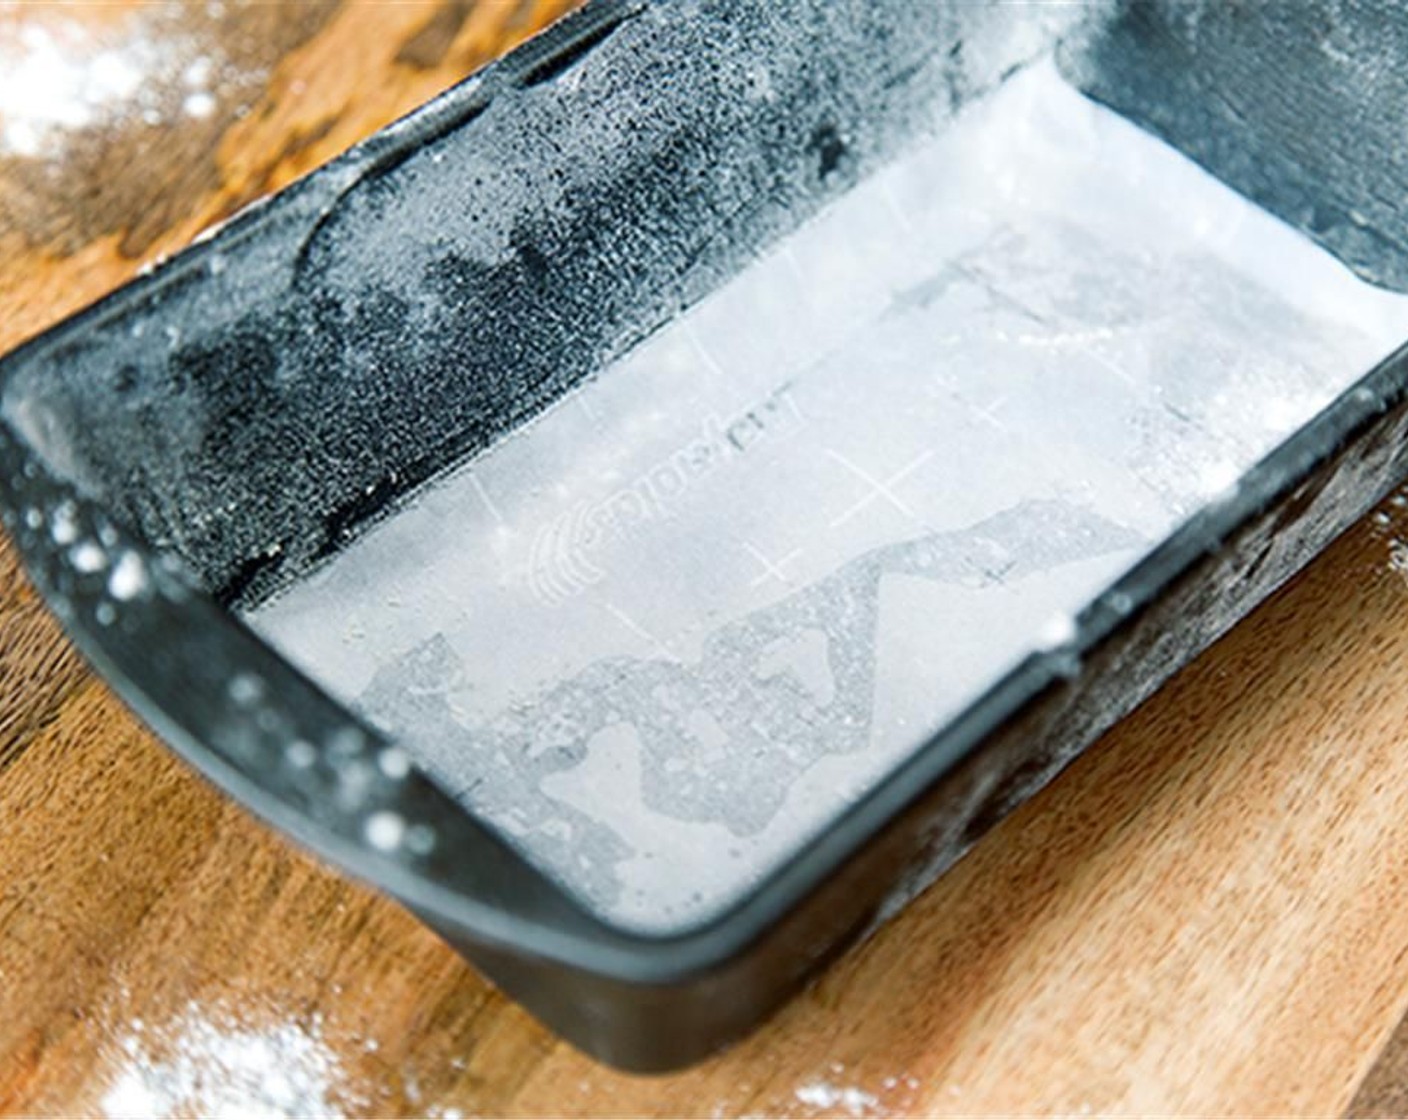 step 1 Your oven does not need preheating, saving you time and reducing energy costs. Grease and flour a loaf pan or muffin tin and let's start preparing the batter!